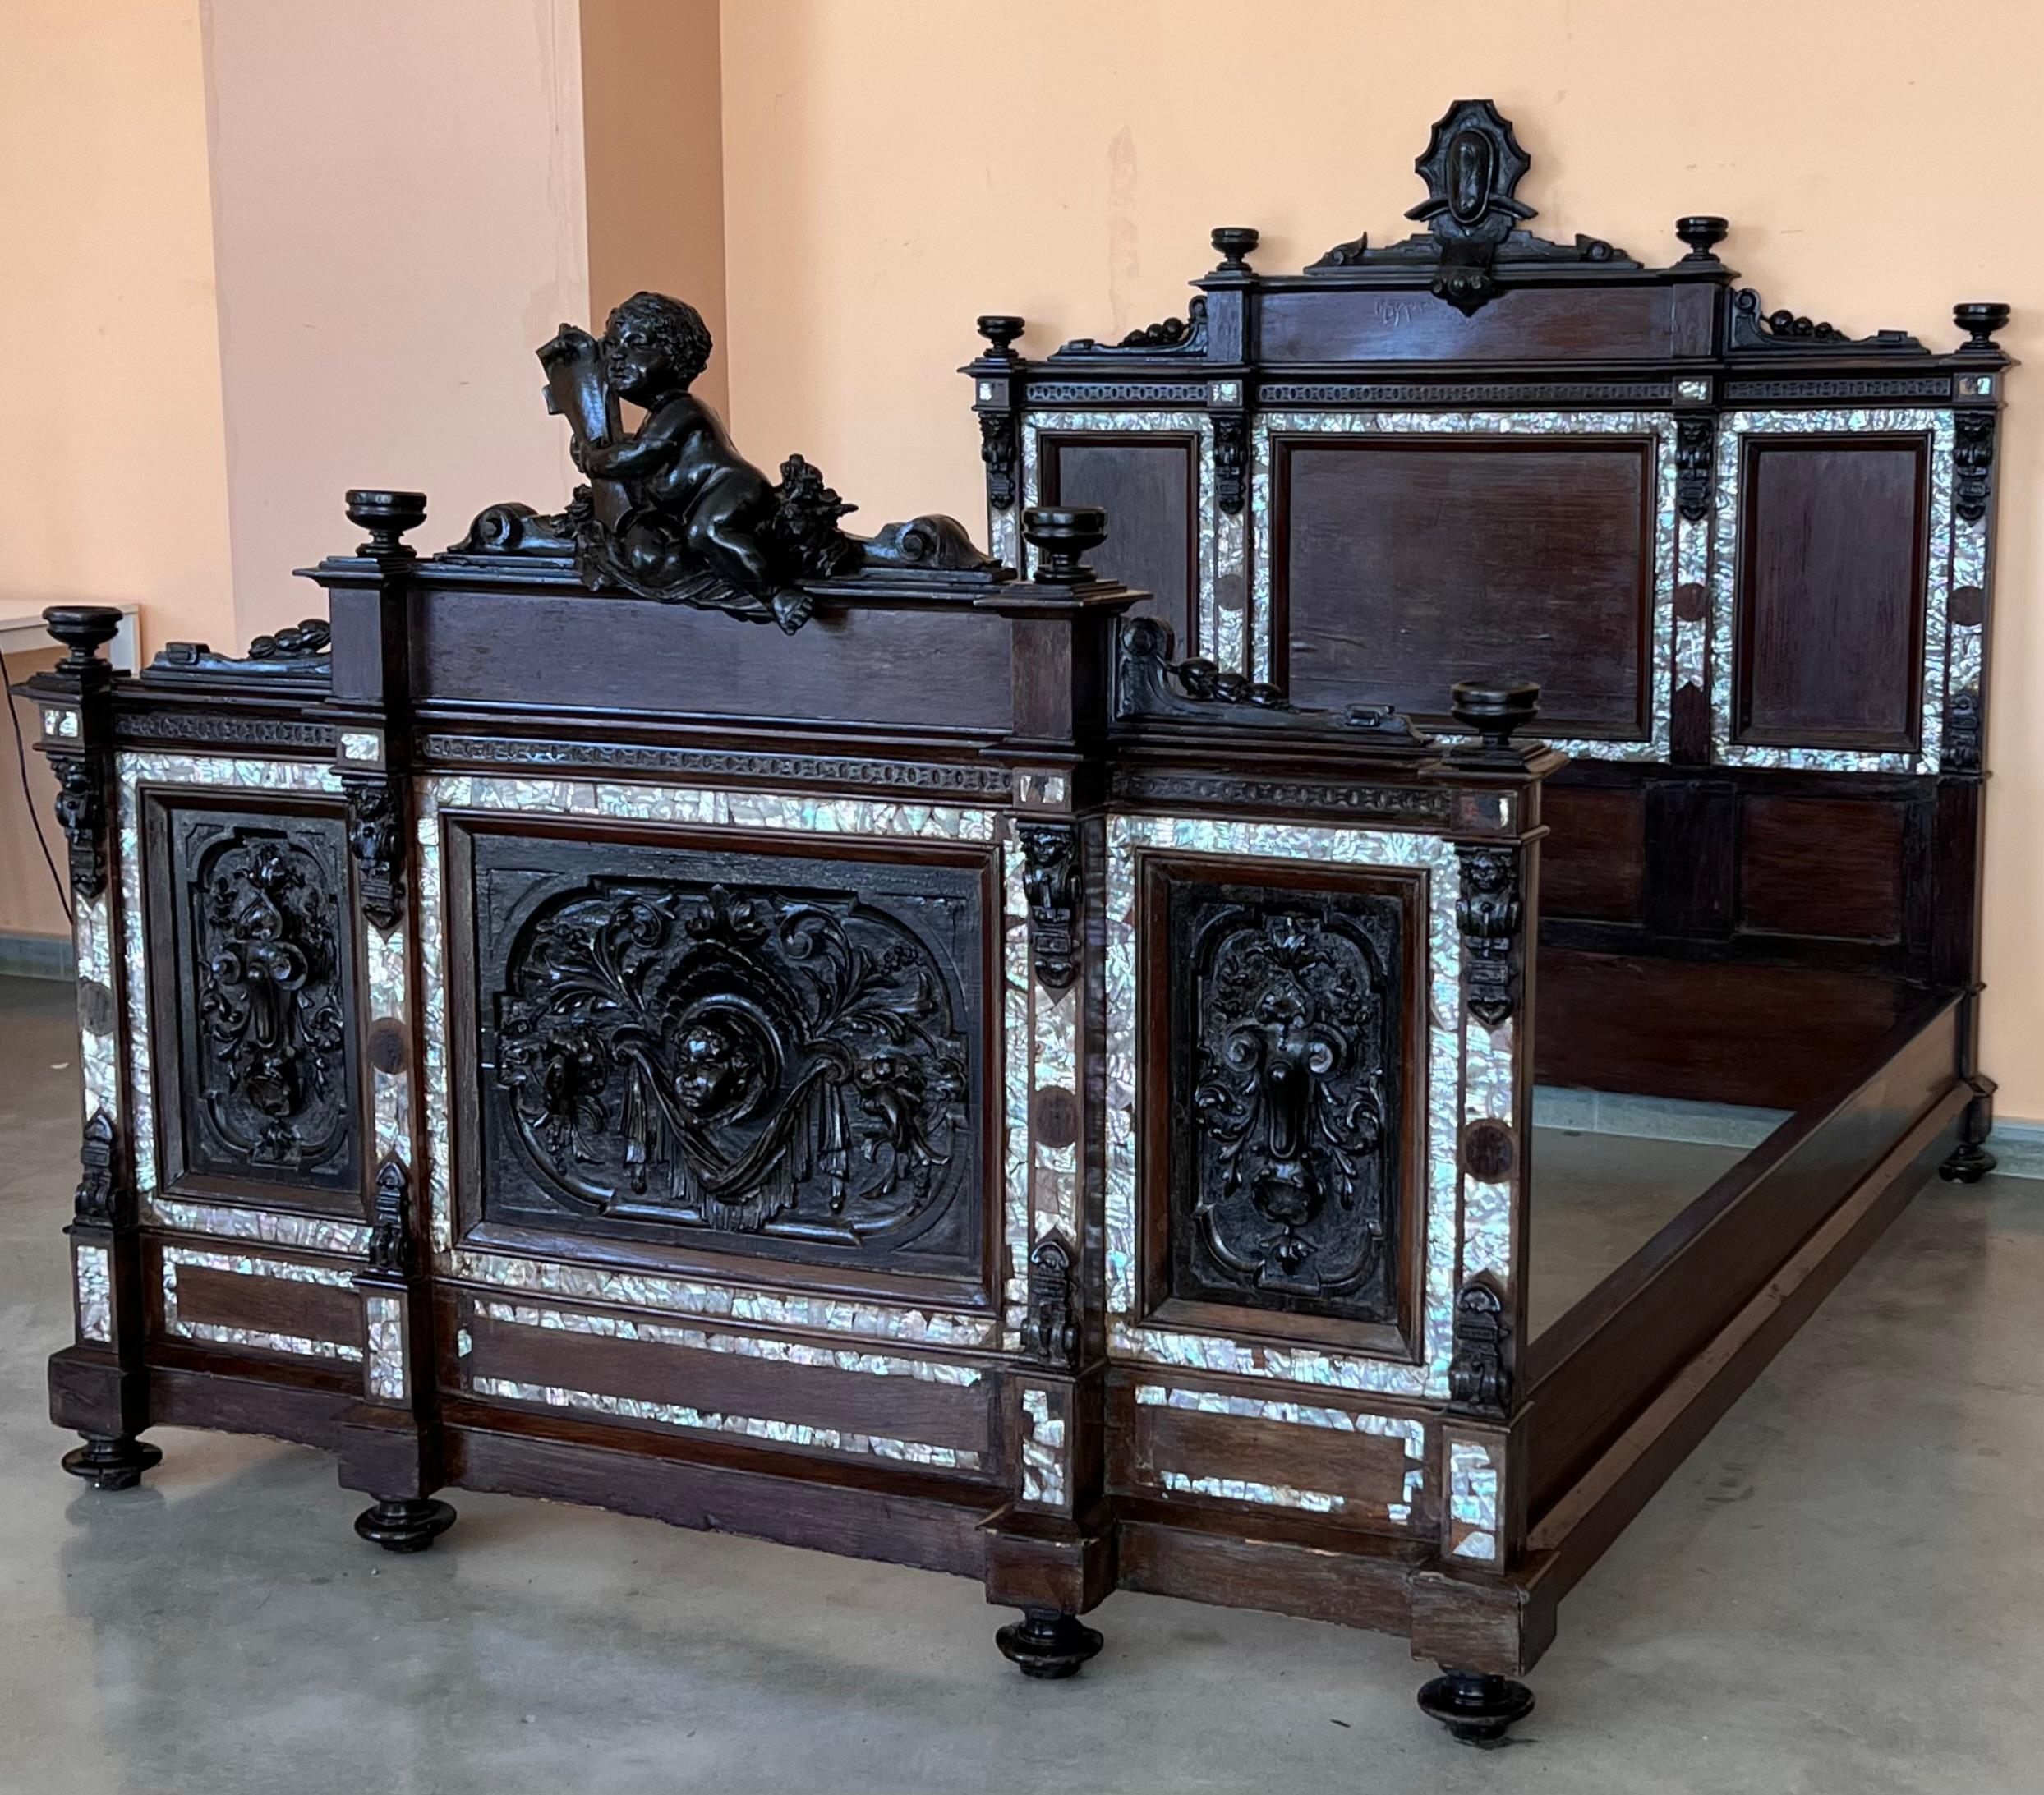 King-size bed with an impressive Renaissance-style headboard and footboard, crafted from beautiful walnut wood. The bed has a fabulous large heavily carved cherub
This original Italian antique set from the late 19th century has been very well